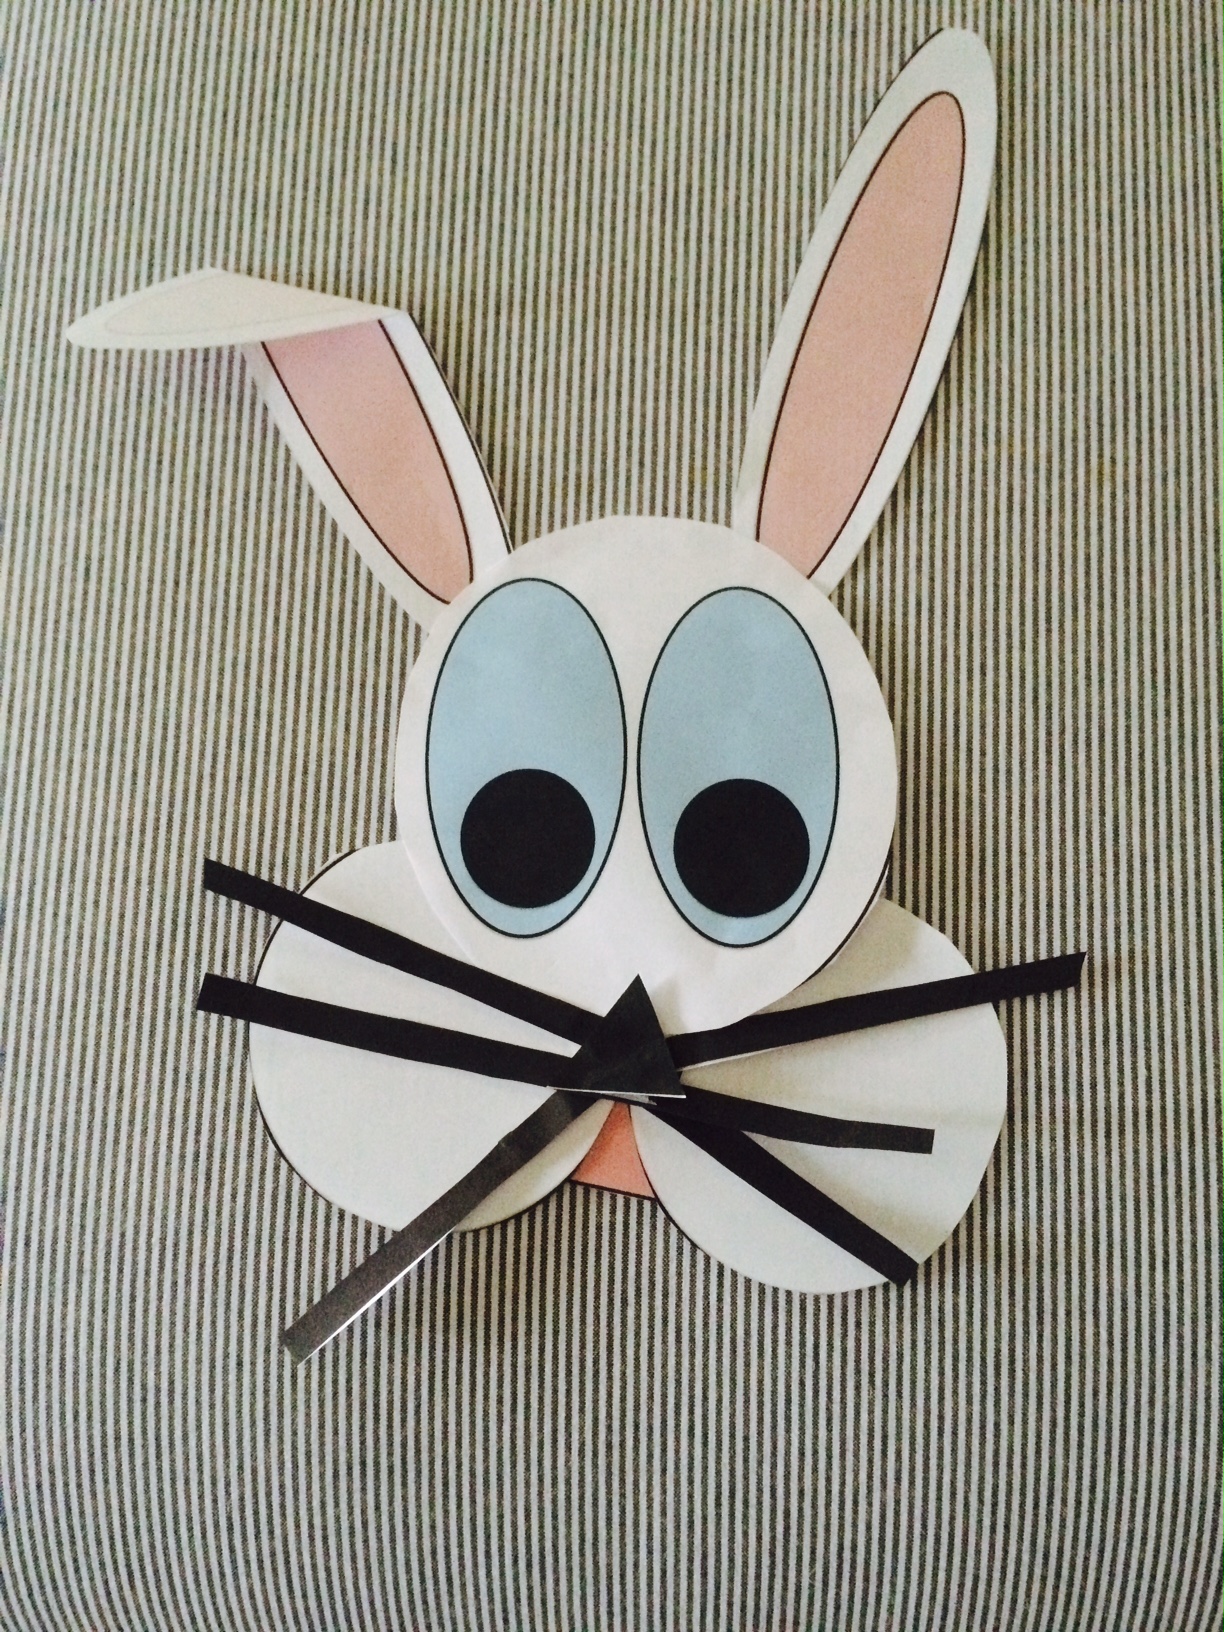 abcteach blog » Blog Archive » Make a Bunny: Craft Project